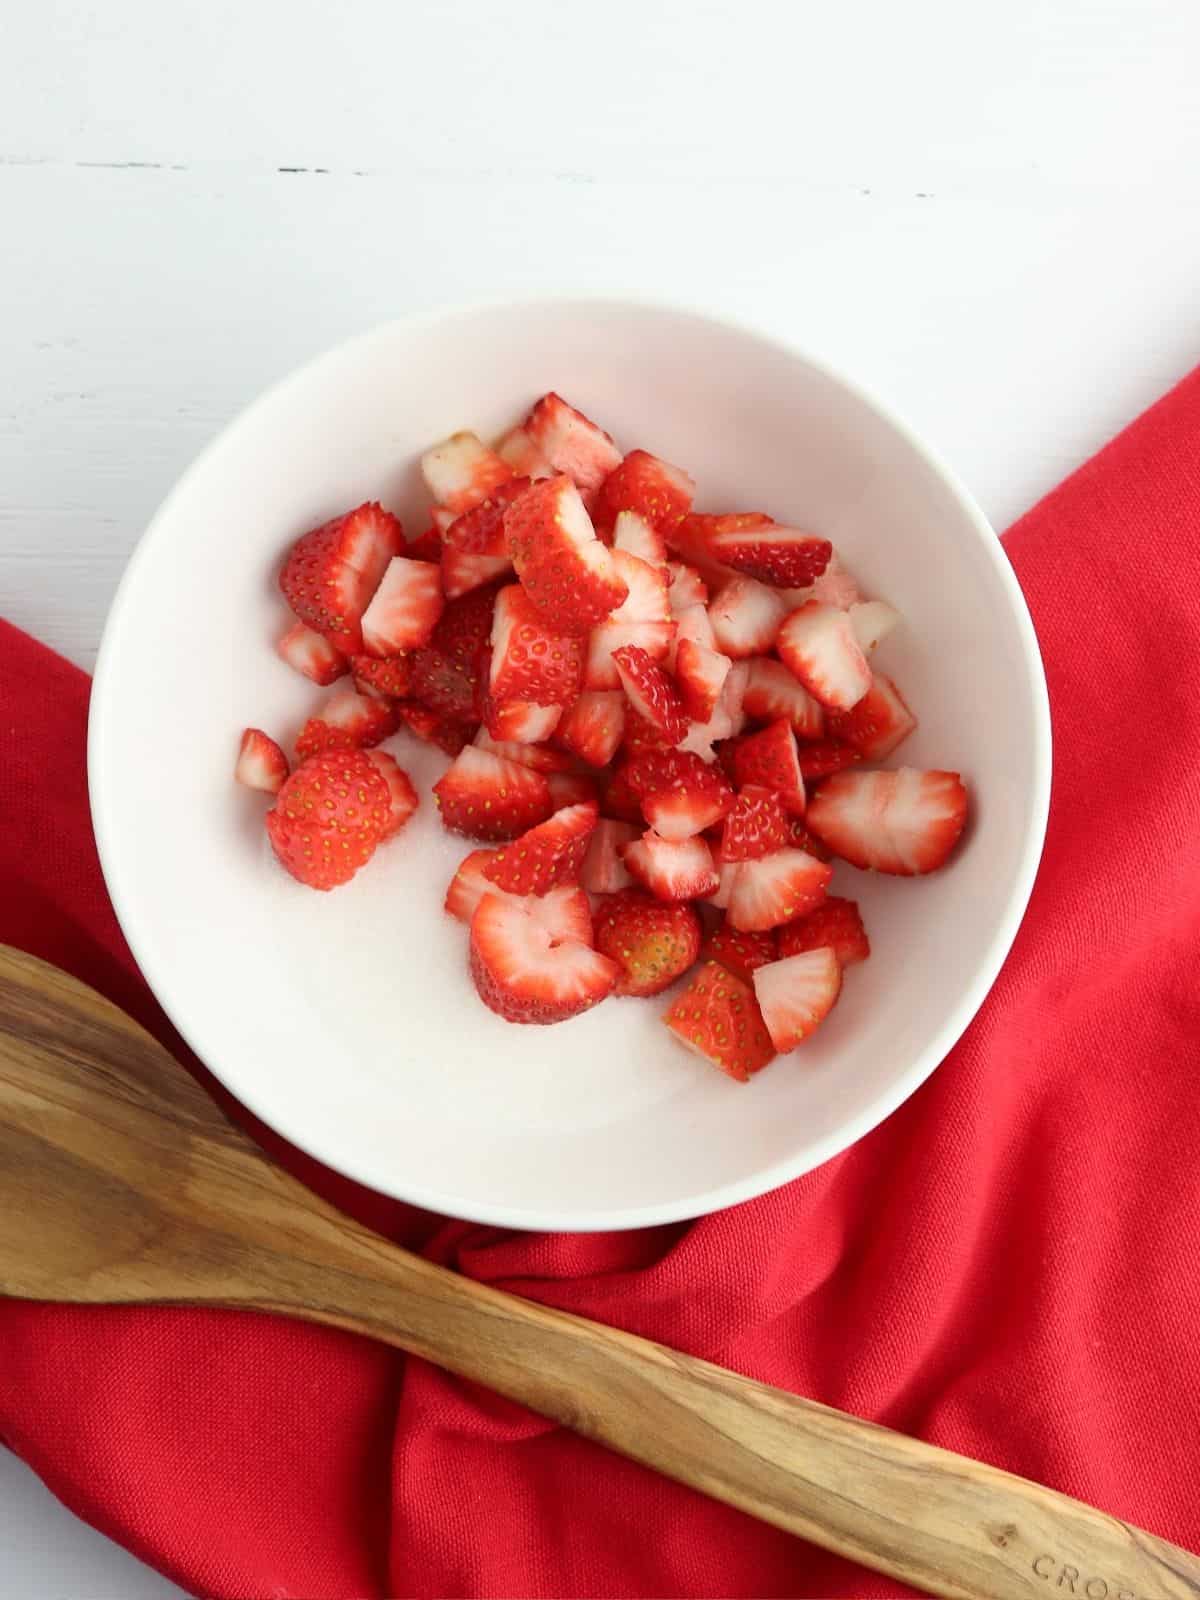 Sliced strawberries with sugar in bowl.